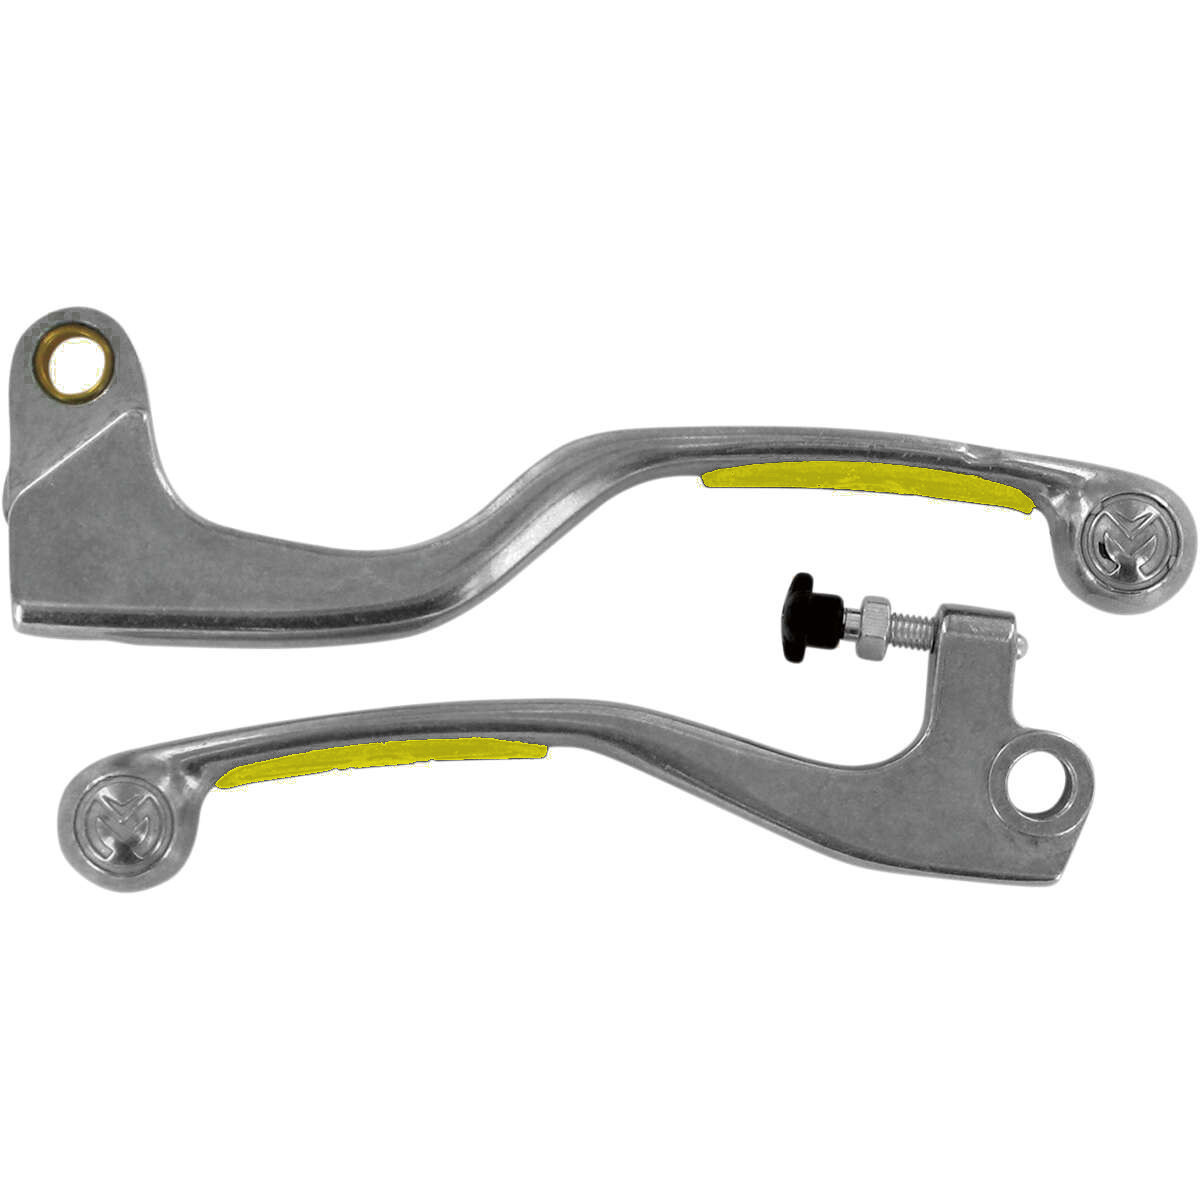 Moose Racing Brake-/Clutch Lever Set Competition Suzuki RM 125/250 96-03, Polished/Yellow